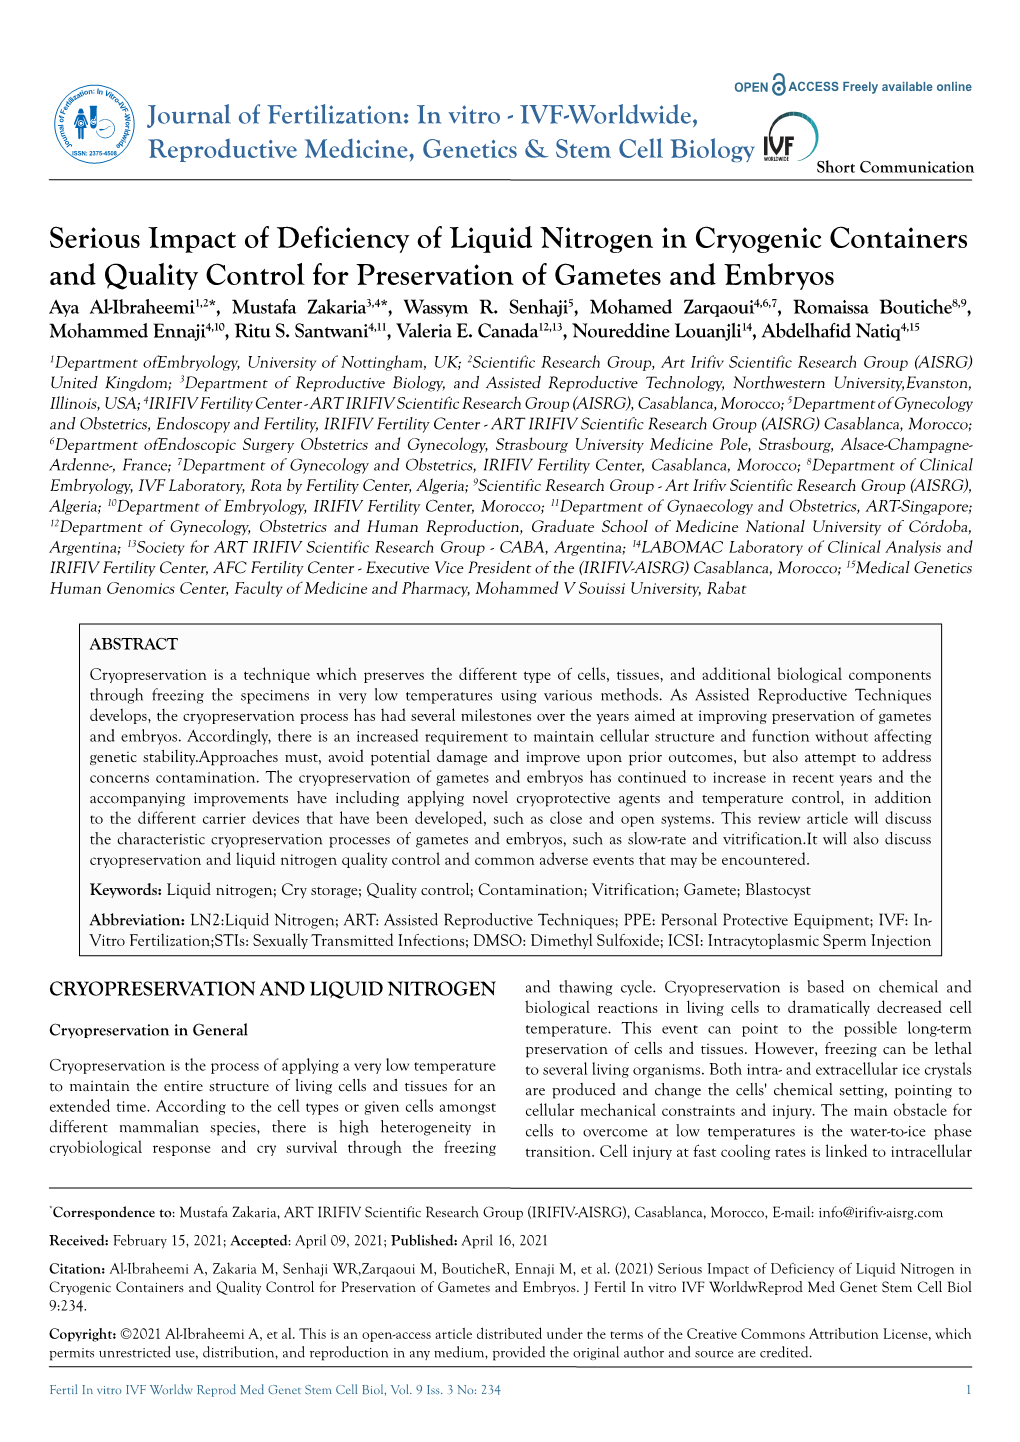 Serious Impact of Deficiency of Liquid Nitrogen in Cryogenic Containers